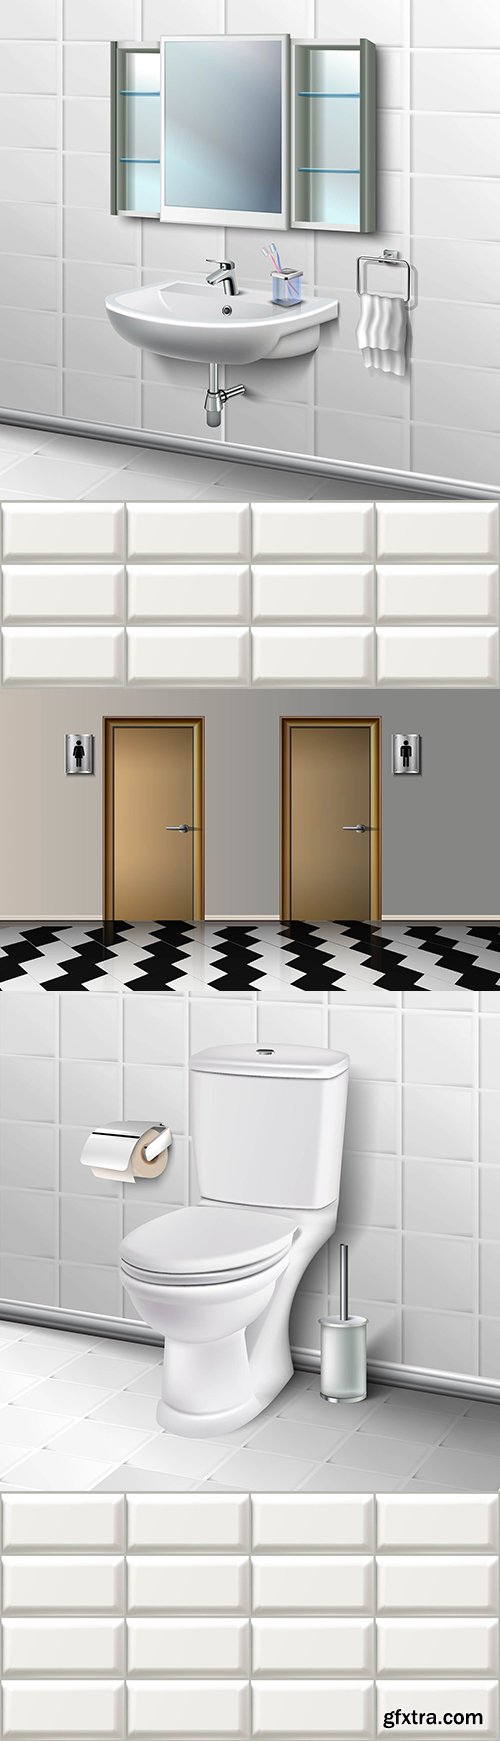 Bathroom and toilet with toilet paper interior illustration